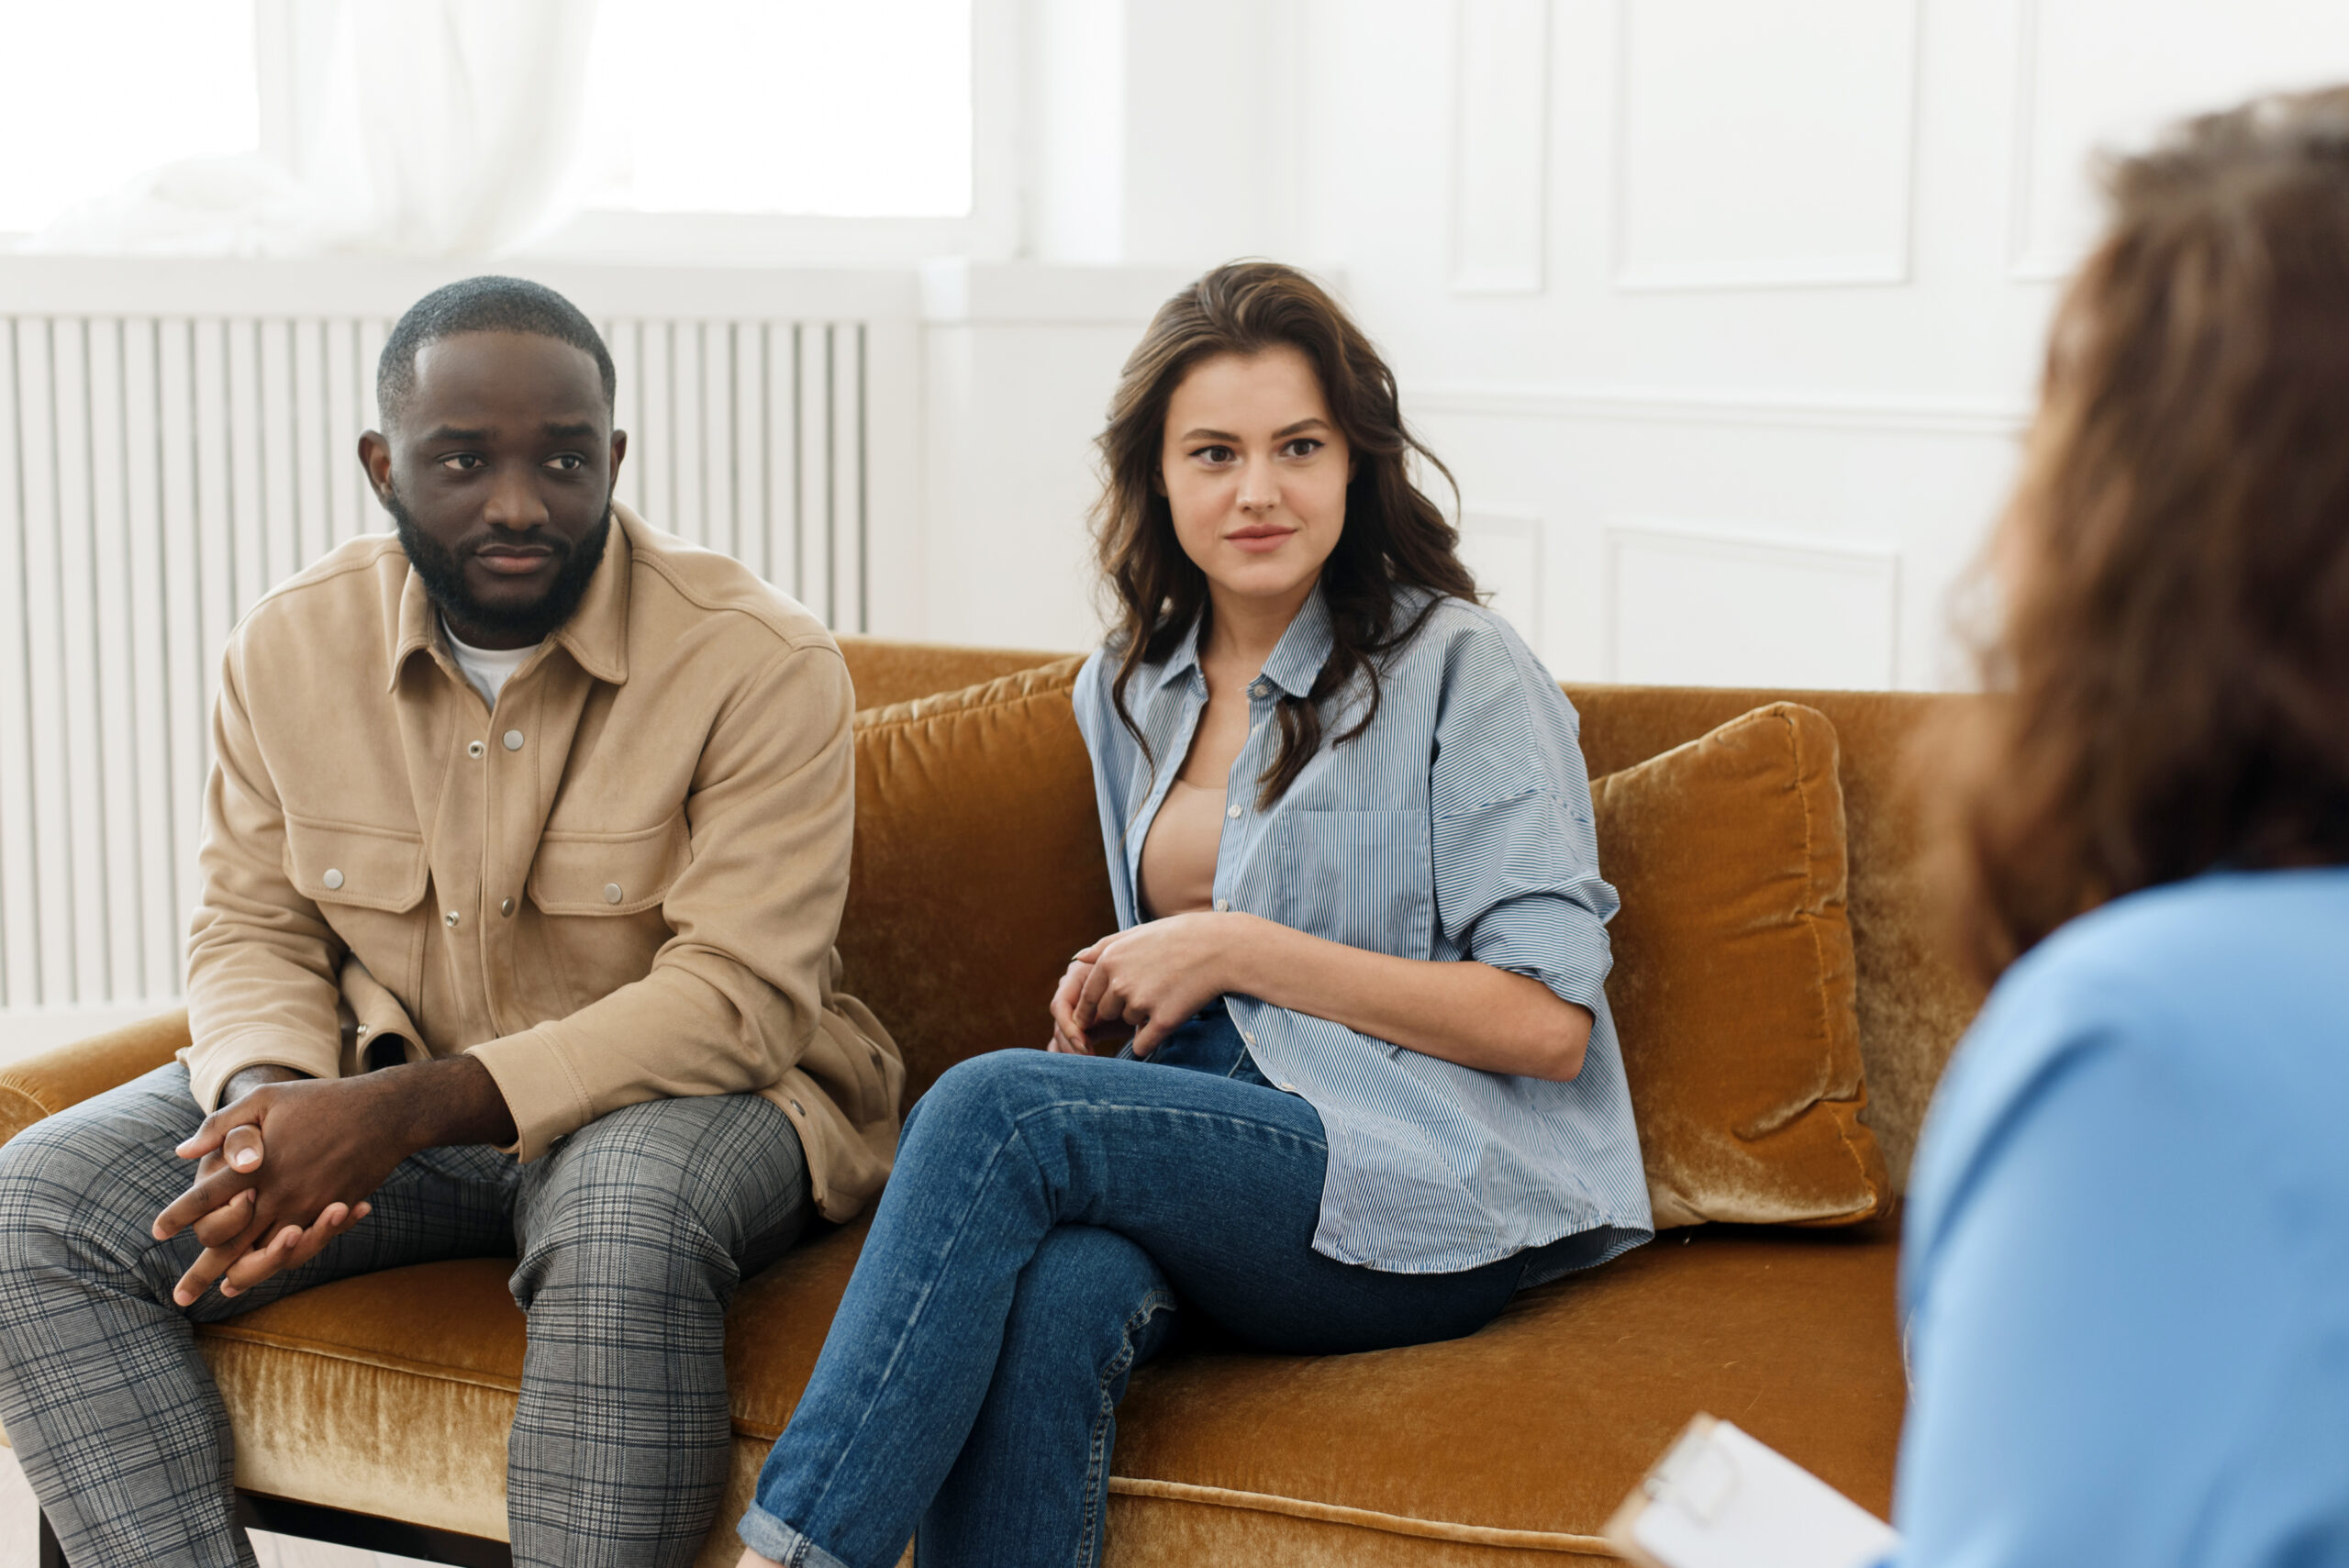 Marriage counseling. Spouses talk to a family psychologist during a meeting after a quarrel, sitting in the office talking about marriage and relationship problems